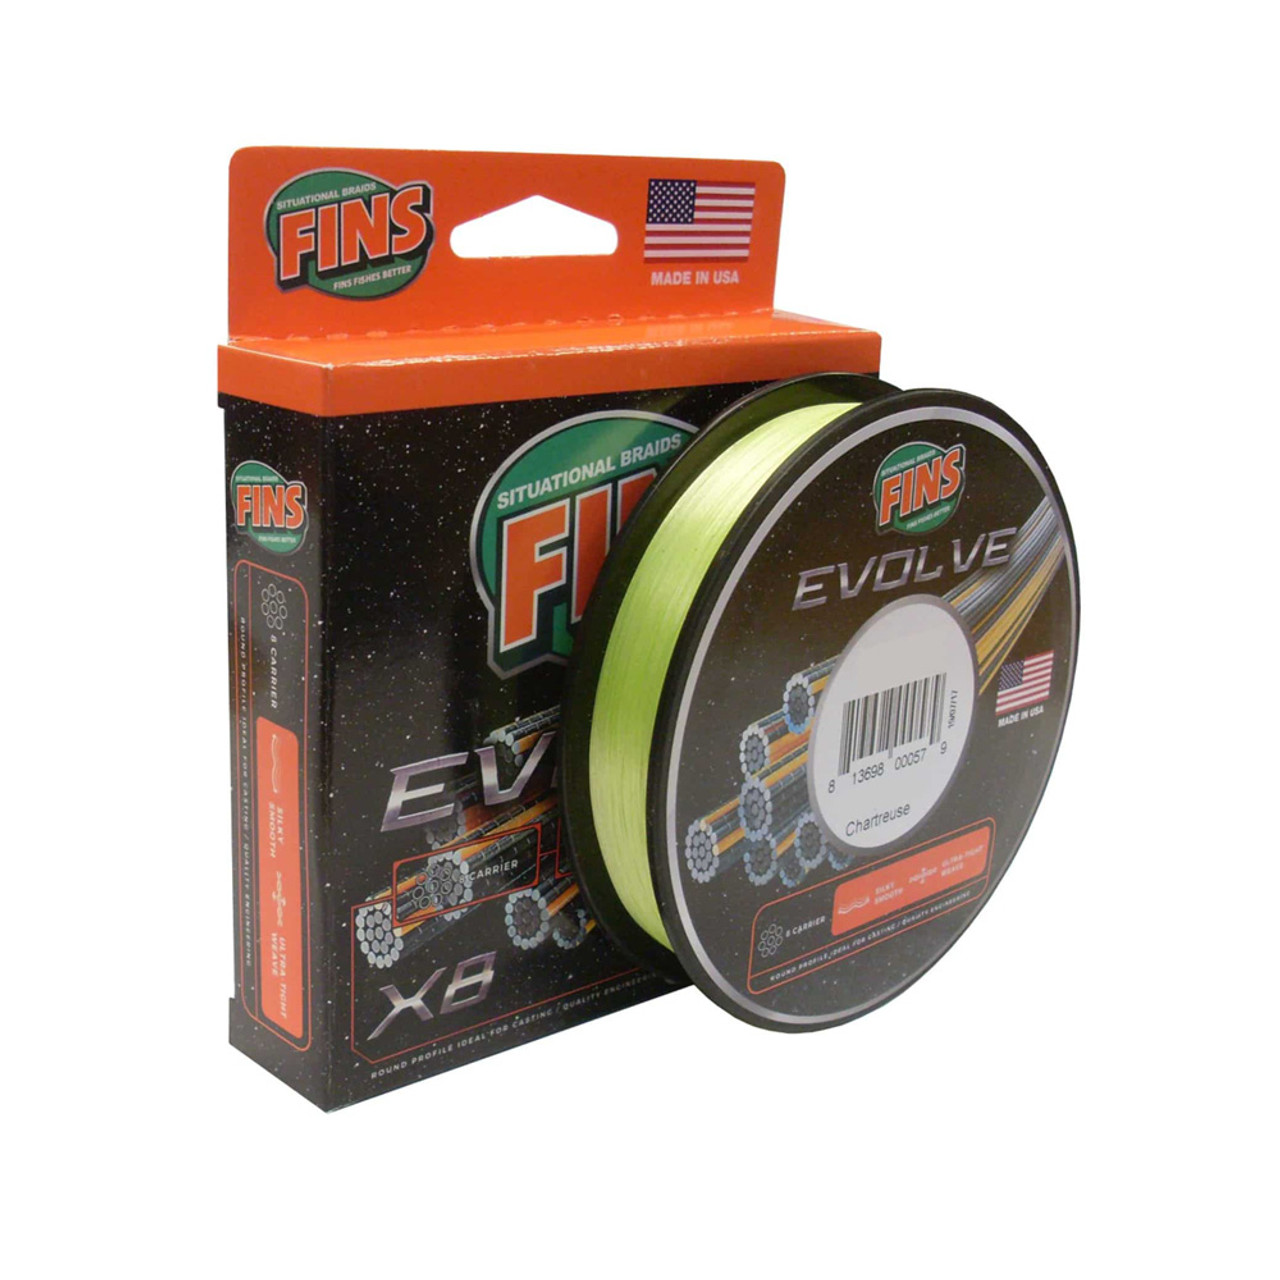 FINS EVOLVE Braided Fishing Line Chartreuse 300YD - McCredden's